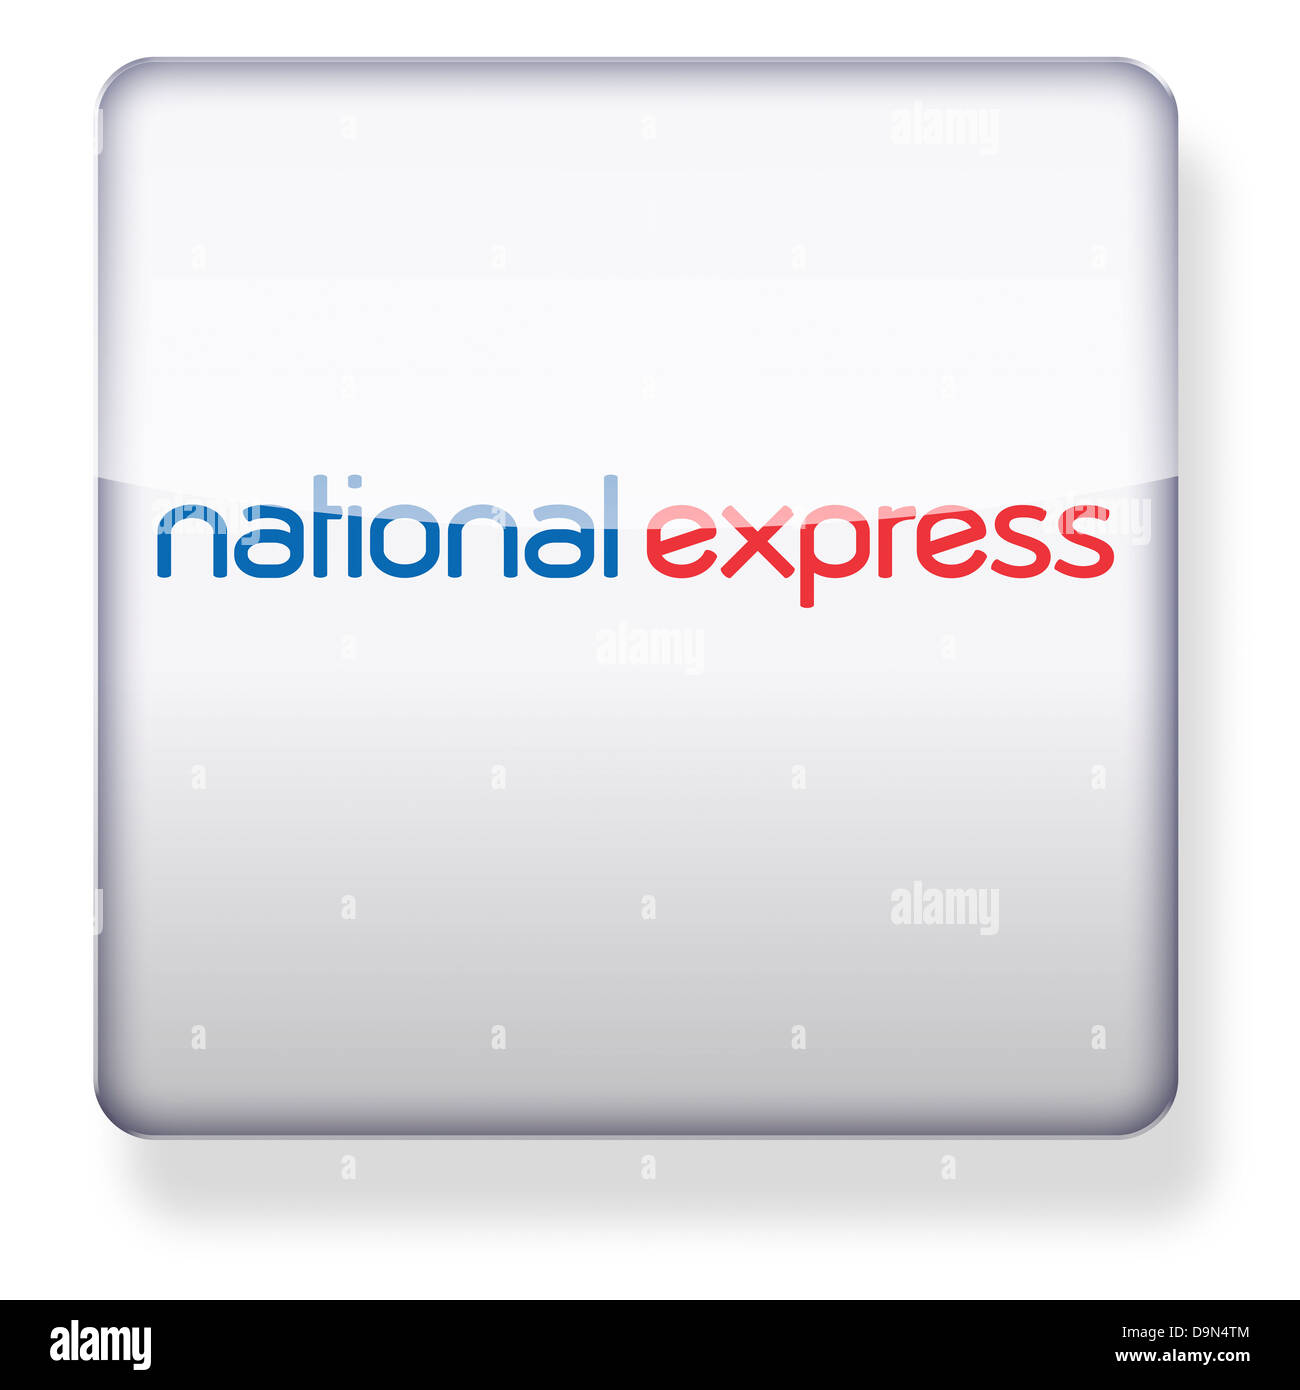 National Express coaches logo as an app icon. Clipping path included. Stock Photo